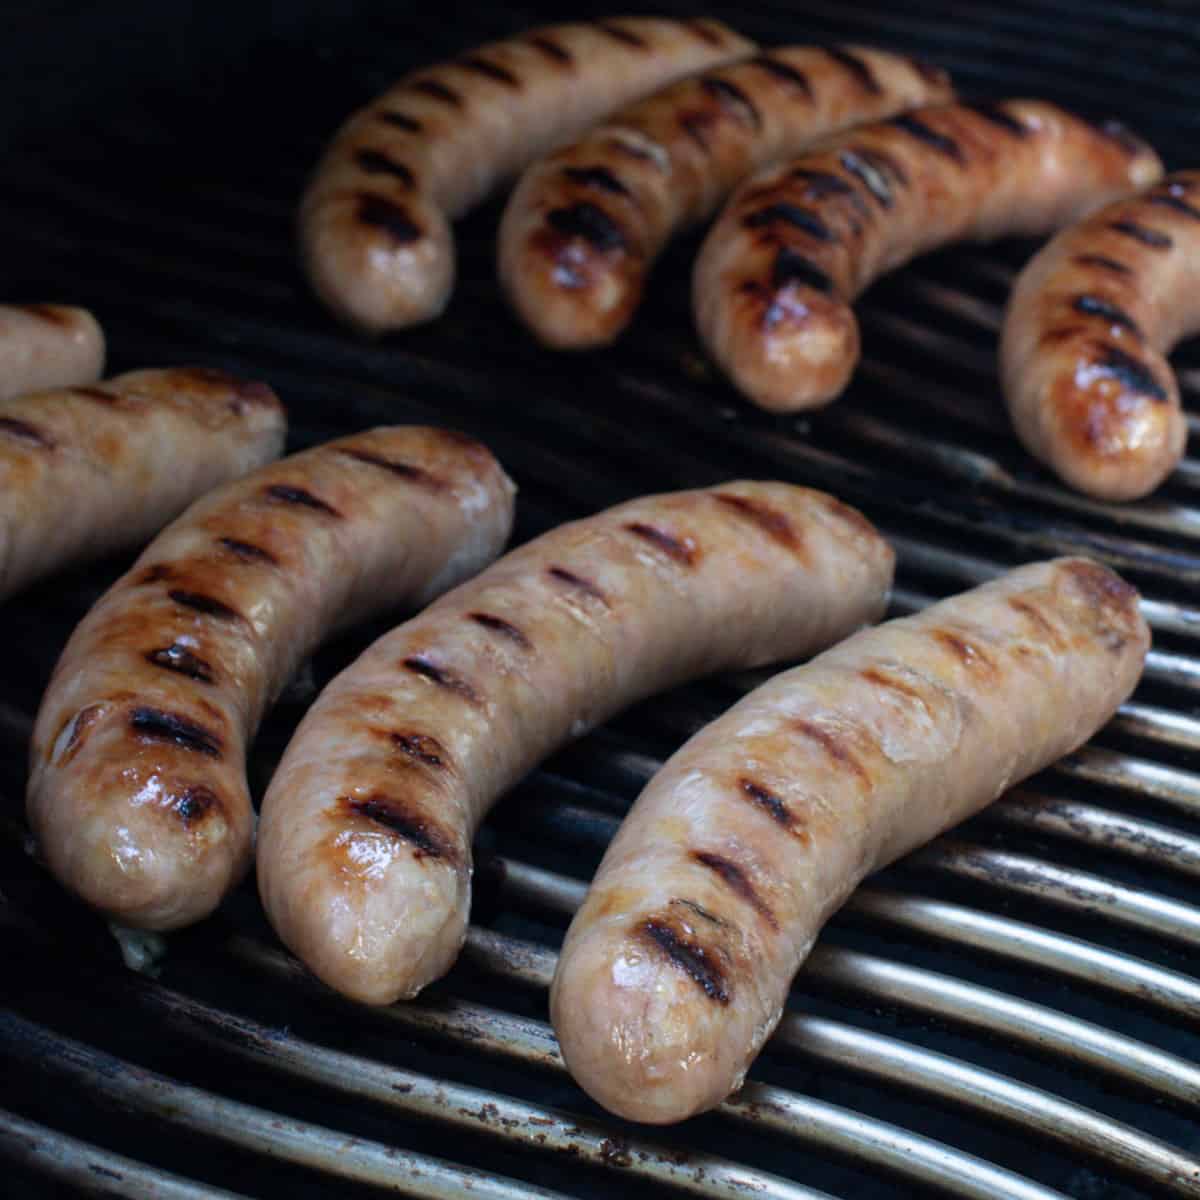 BBQ Basics: How to cook perfect sausages on the barbecue